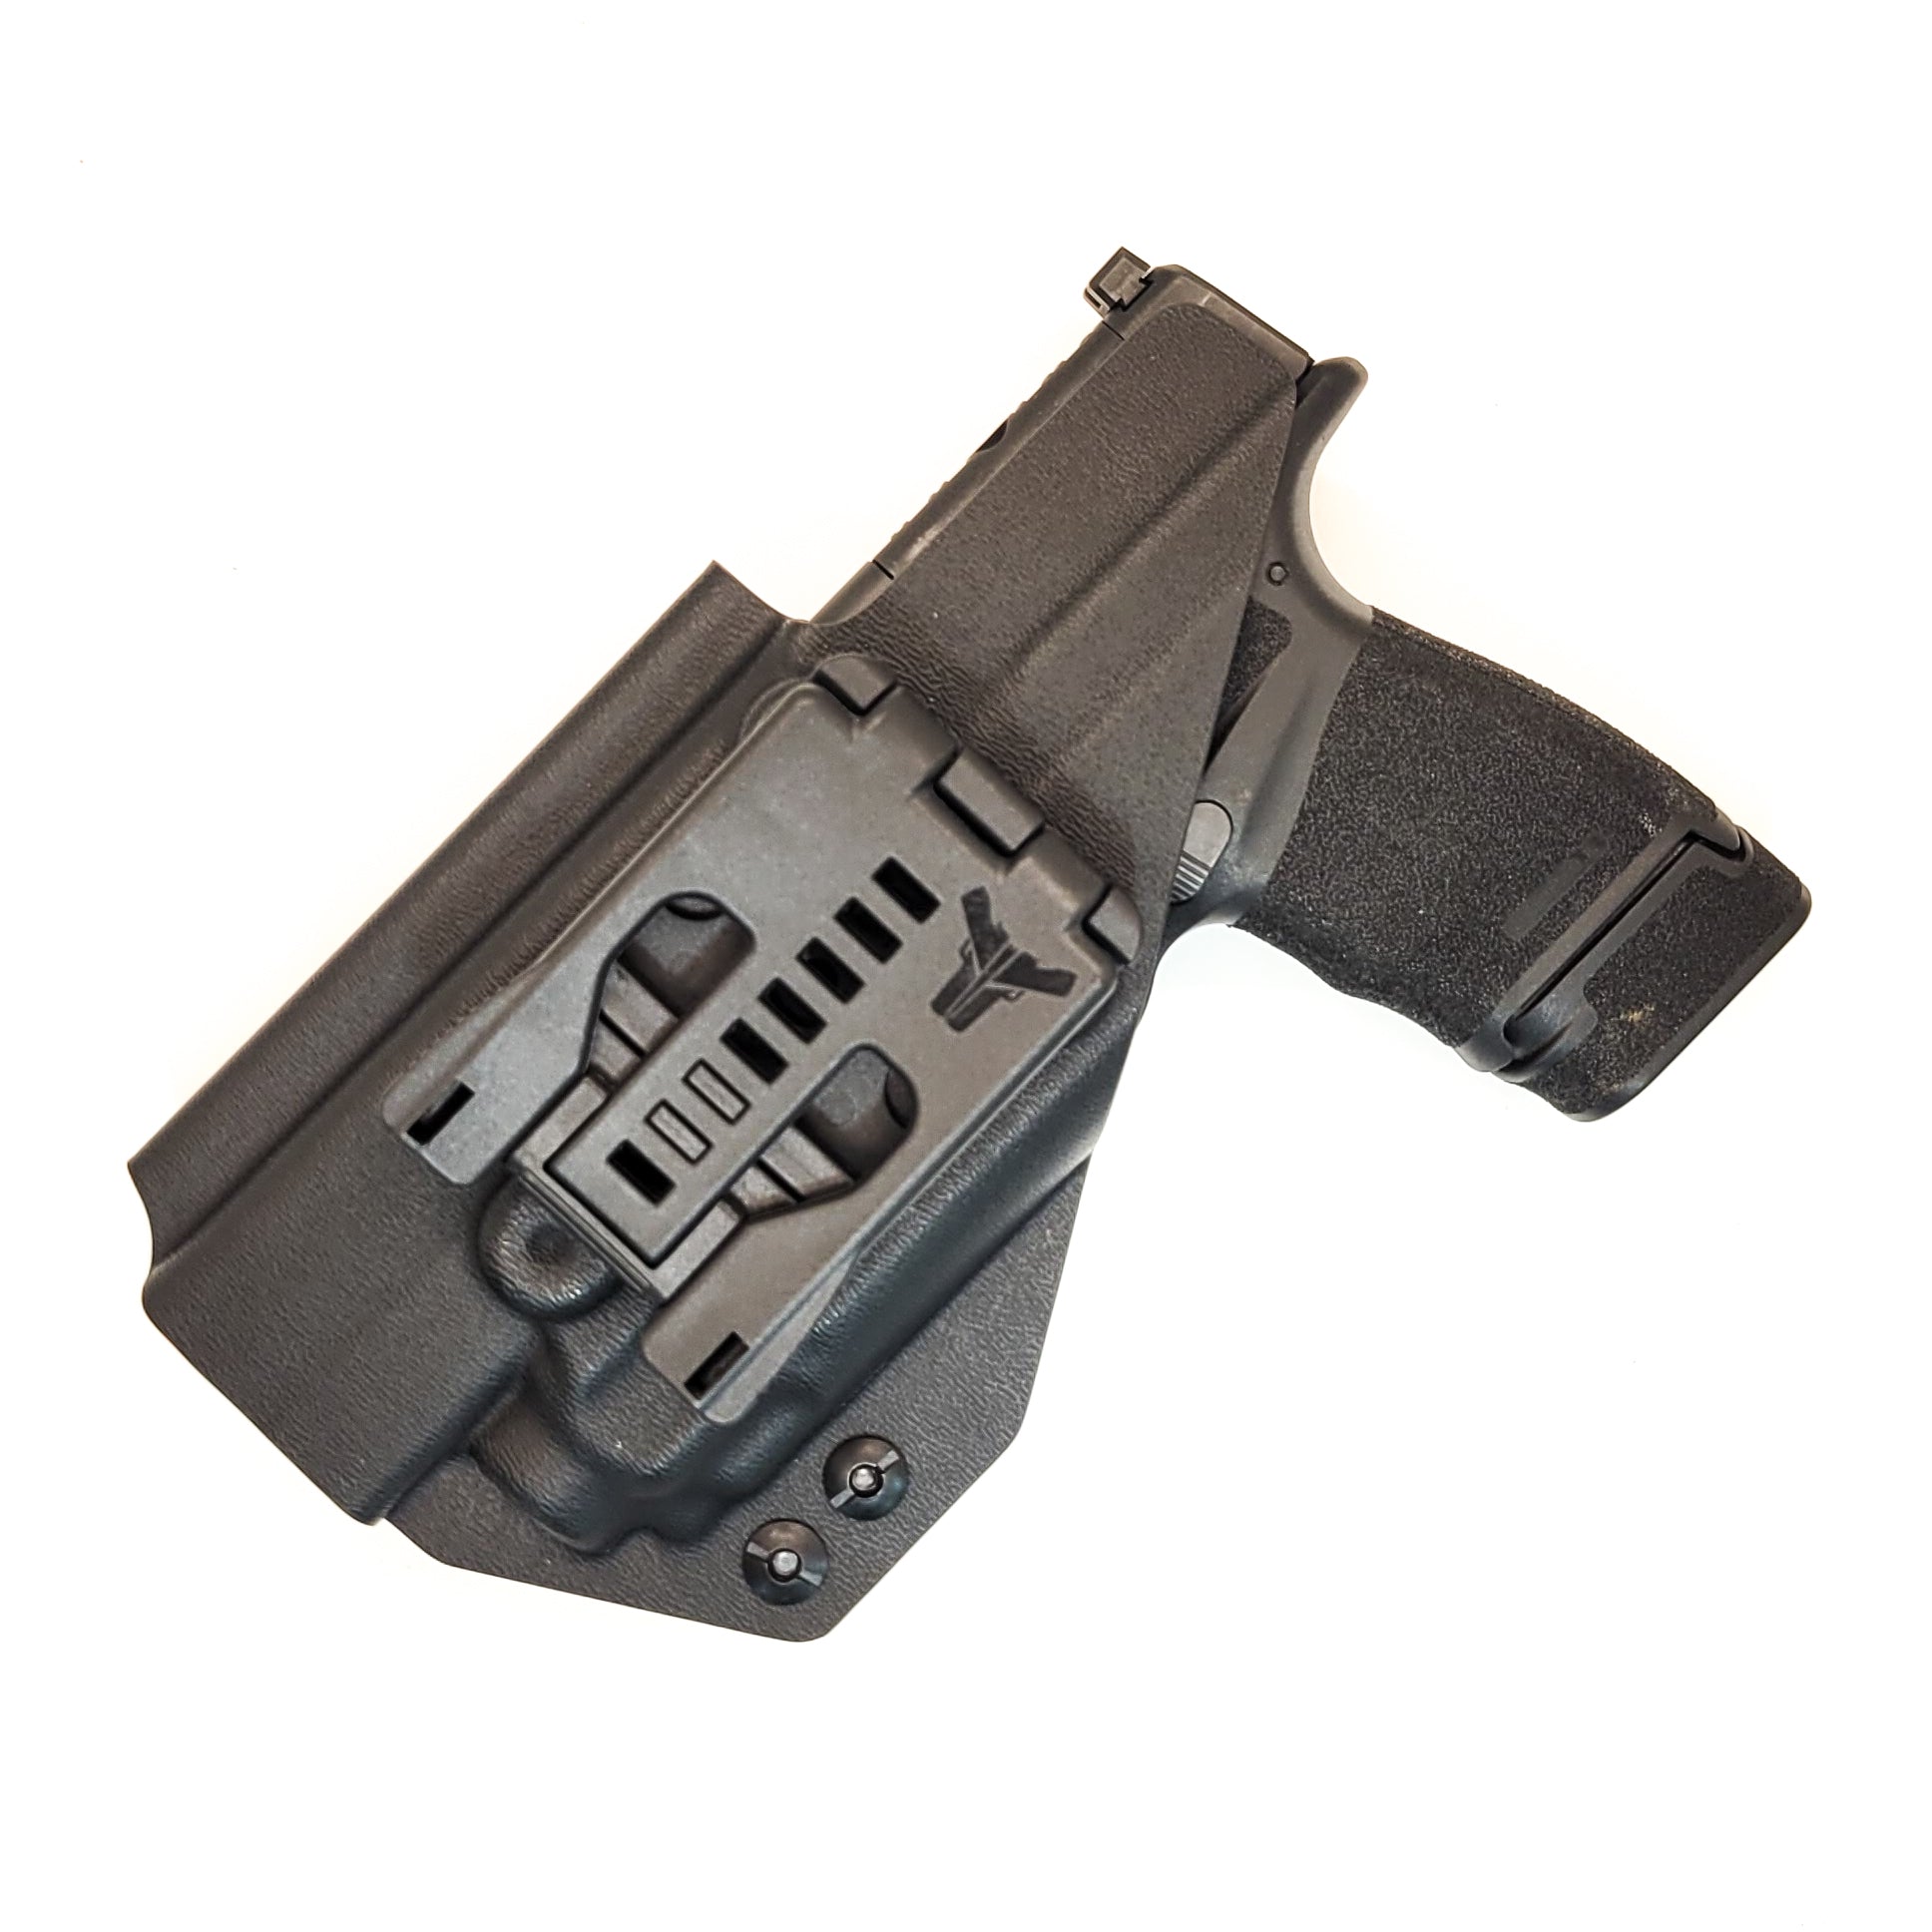 For the best, OWB Outside Waistband Kydex Holster designed to fit the Springfield Hellcat Mico Compact or Hellcat RDP pistol with Streamlight TLR-8 Sub, shop Four Brothers Holsters. Full sweat guard, adjustable retention, open muzzle for threaded barrels cleared and for red dot sights. Made in the USA.